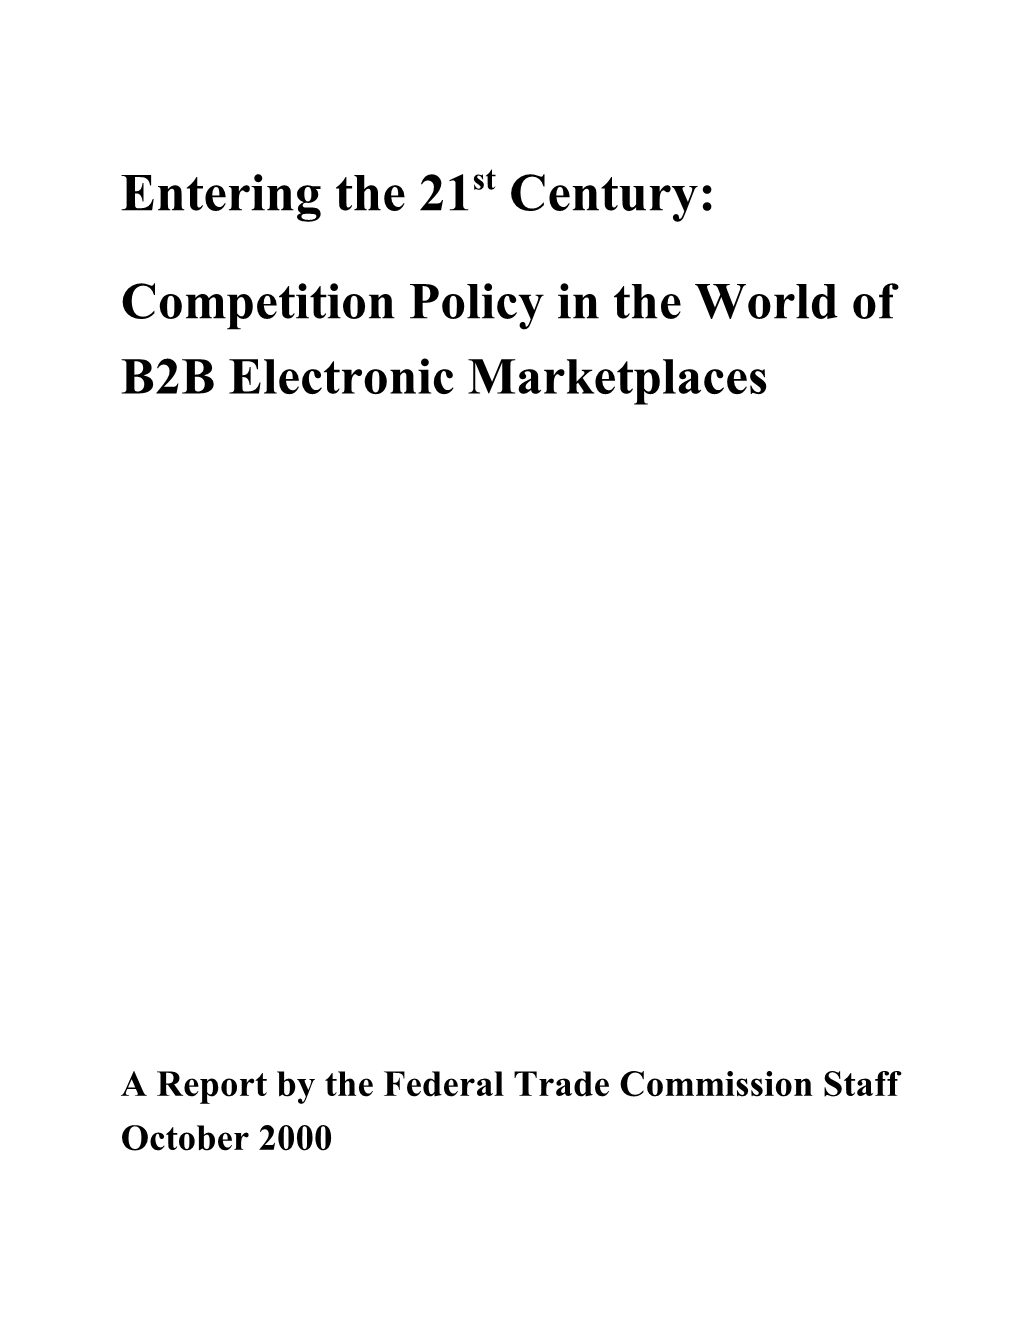 Competition Policy in the World of B2B Electronic Marketplaces